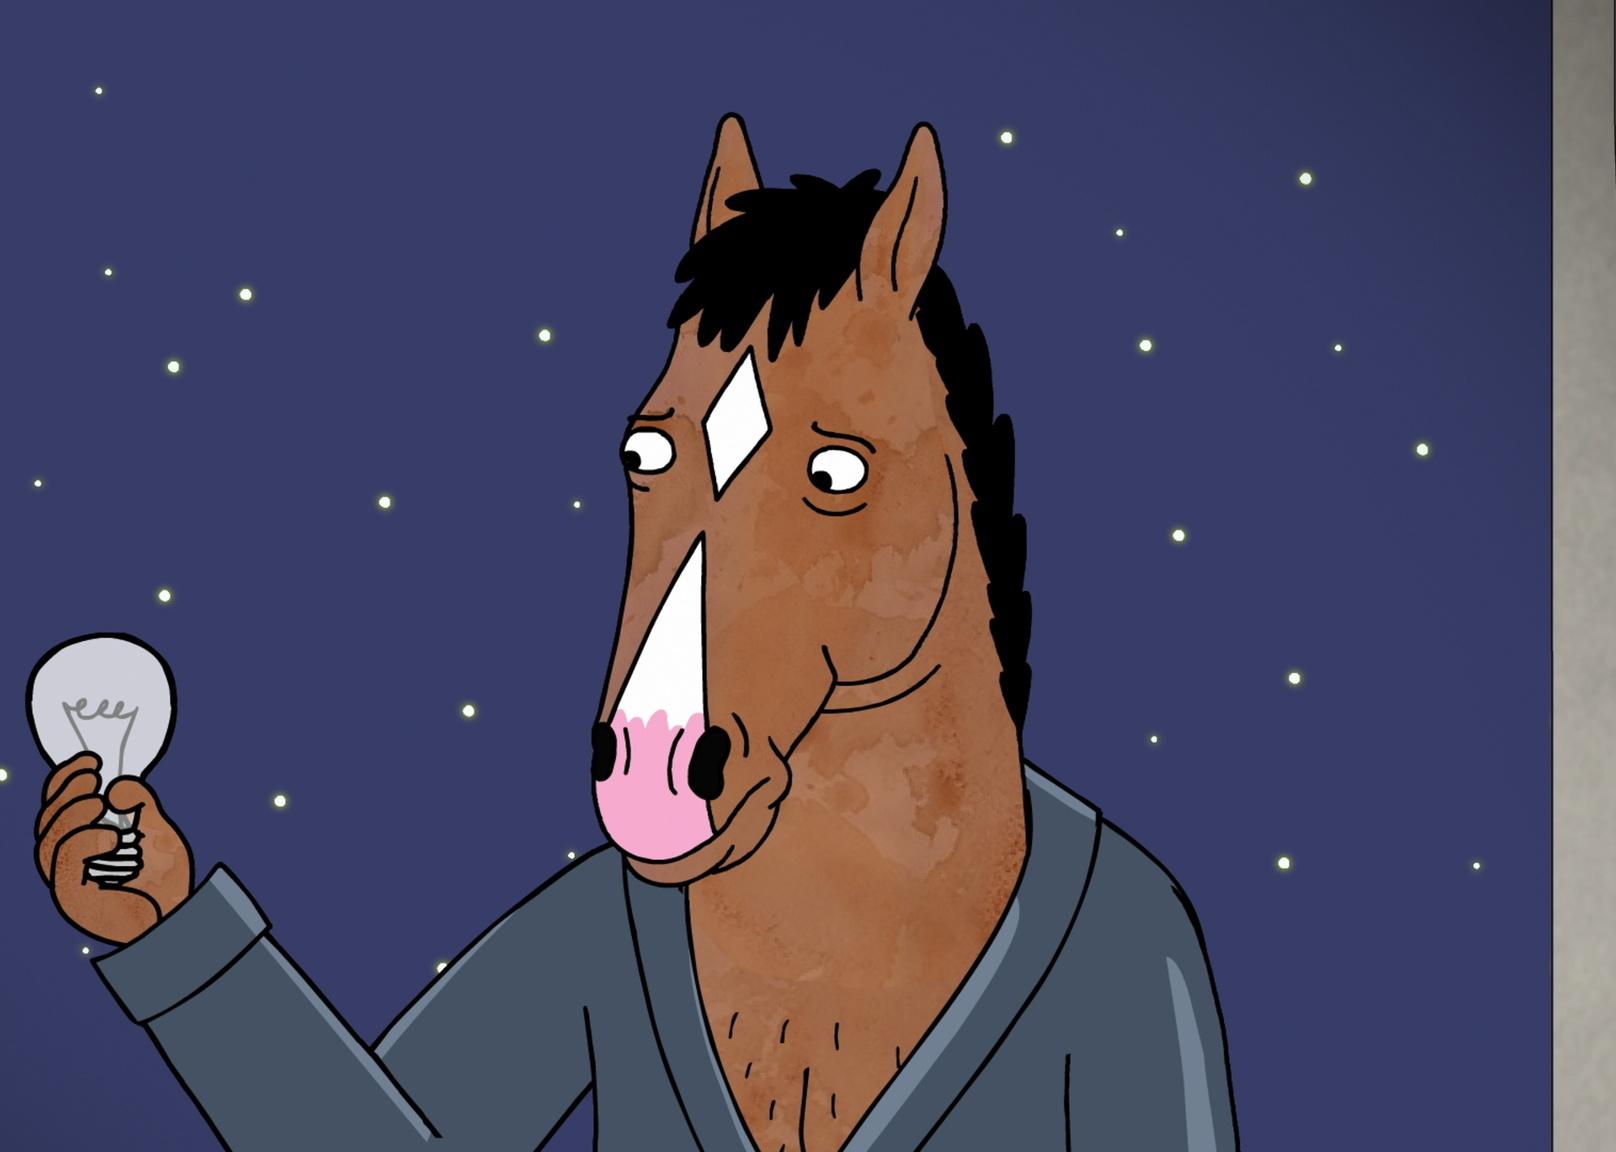 A cartoon of a horse in a robe holding a light bulb.